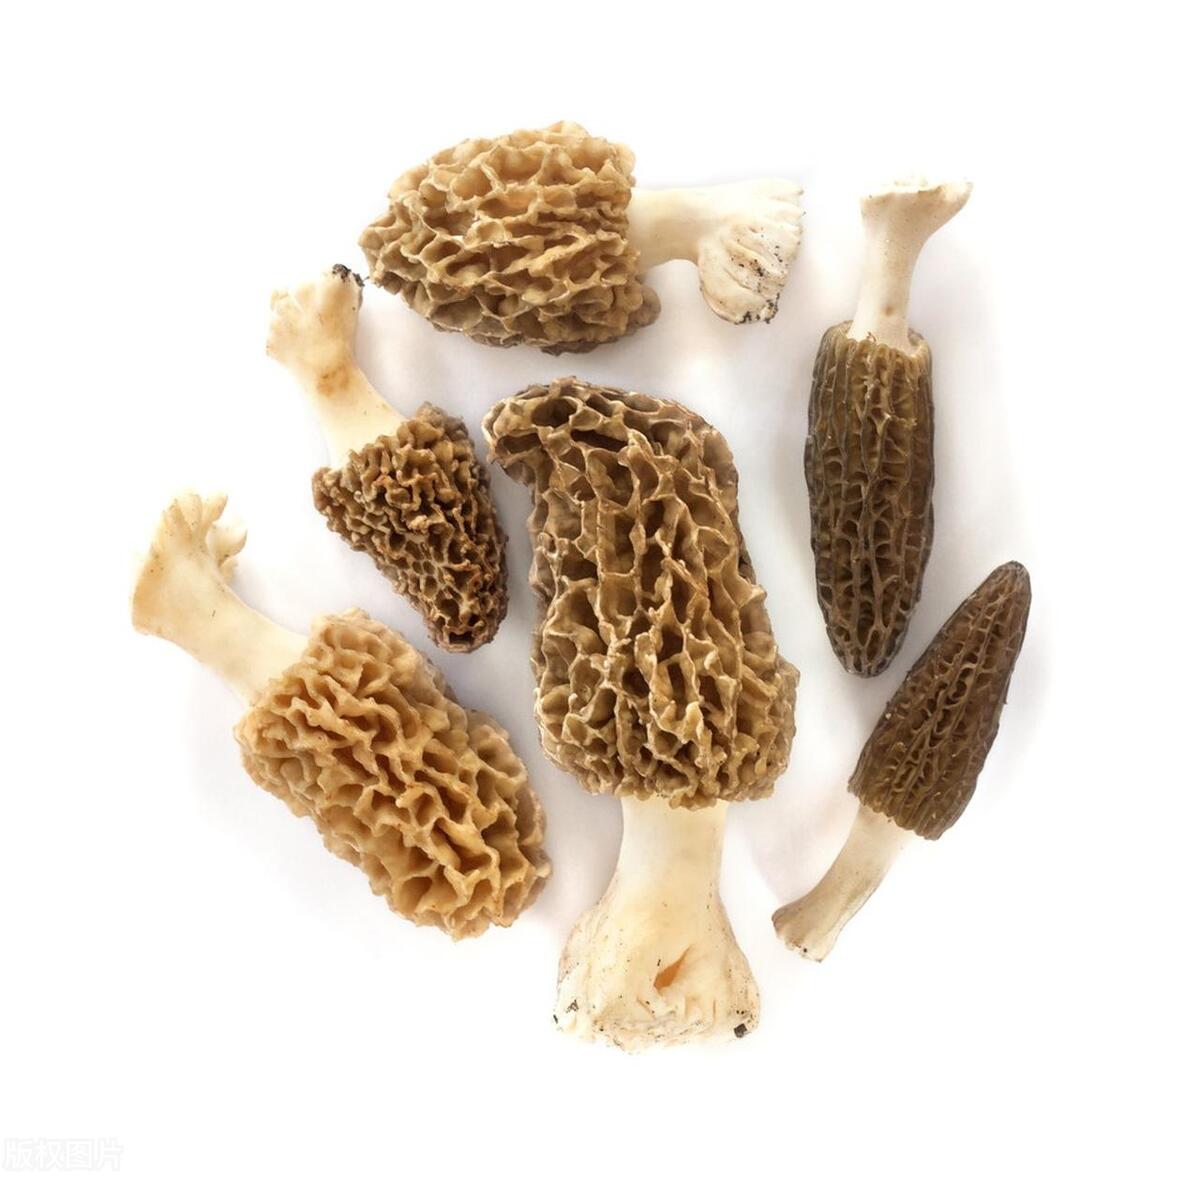 Article Title: Fine-Tuning Morel Mushrooms Growing Conditions: A Grower's Manual